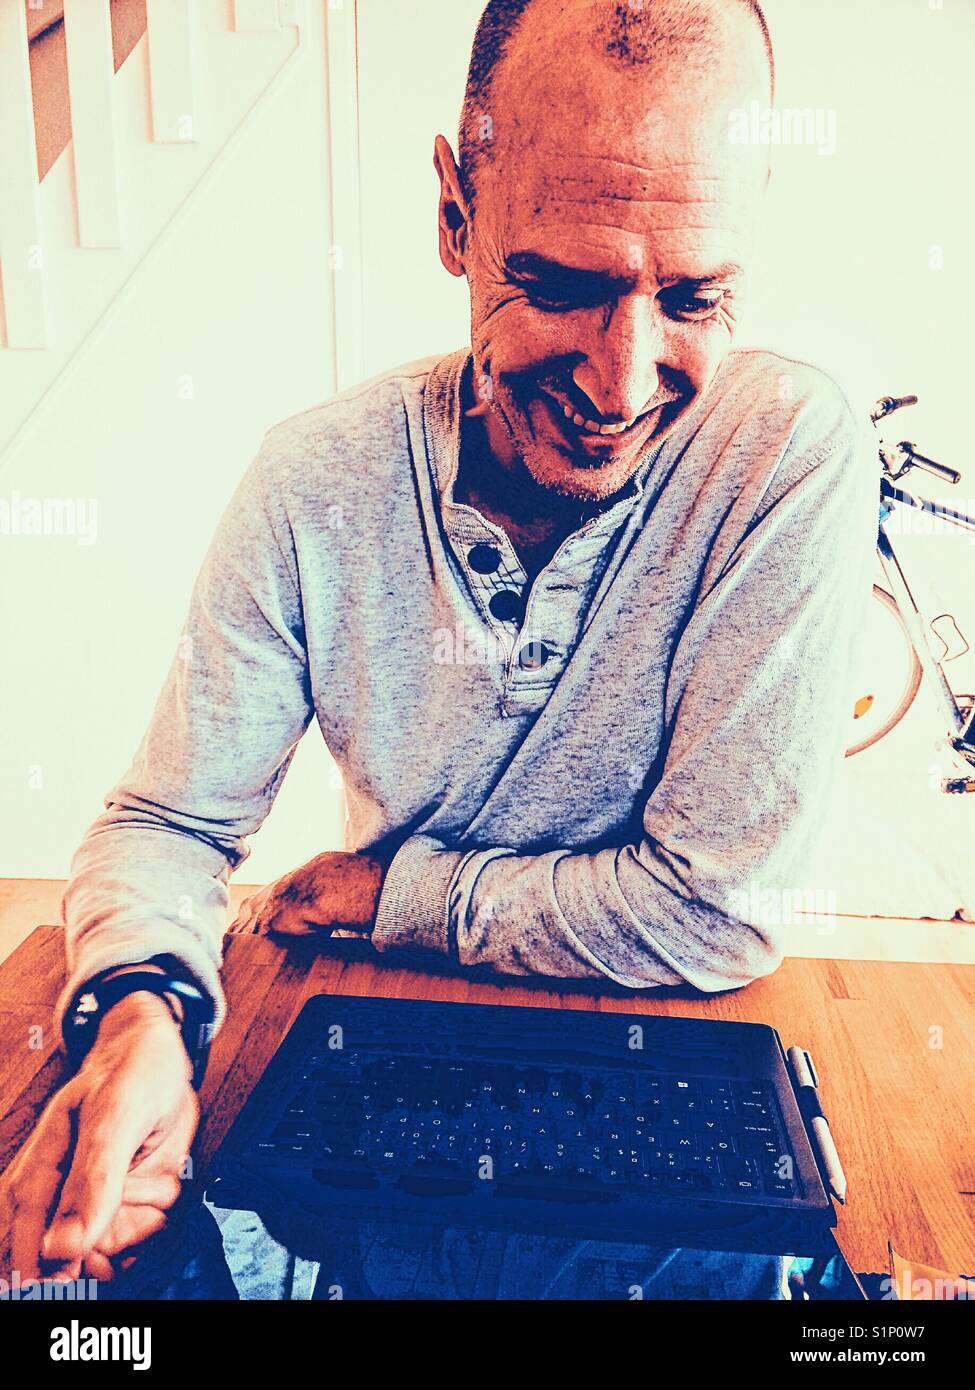 Smiling middle aged Scandinavian man working on laptop at home Stock Photo